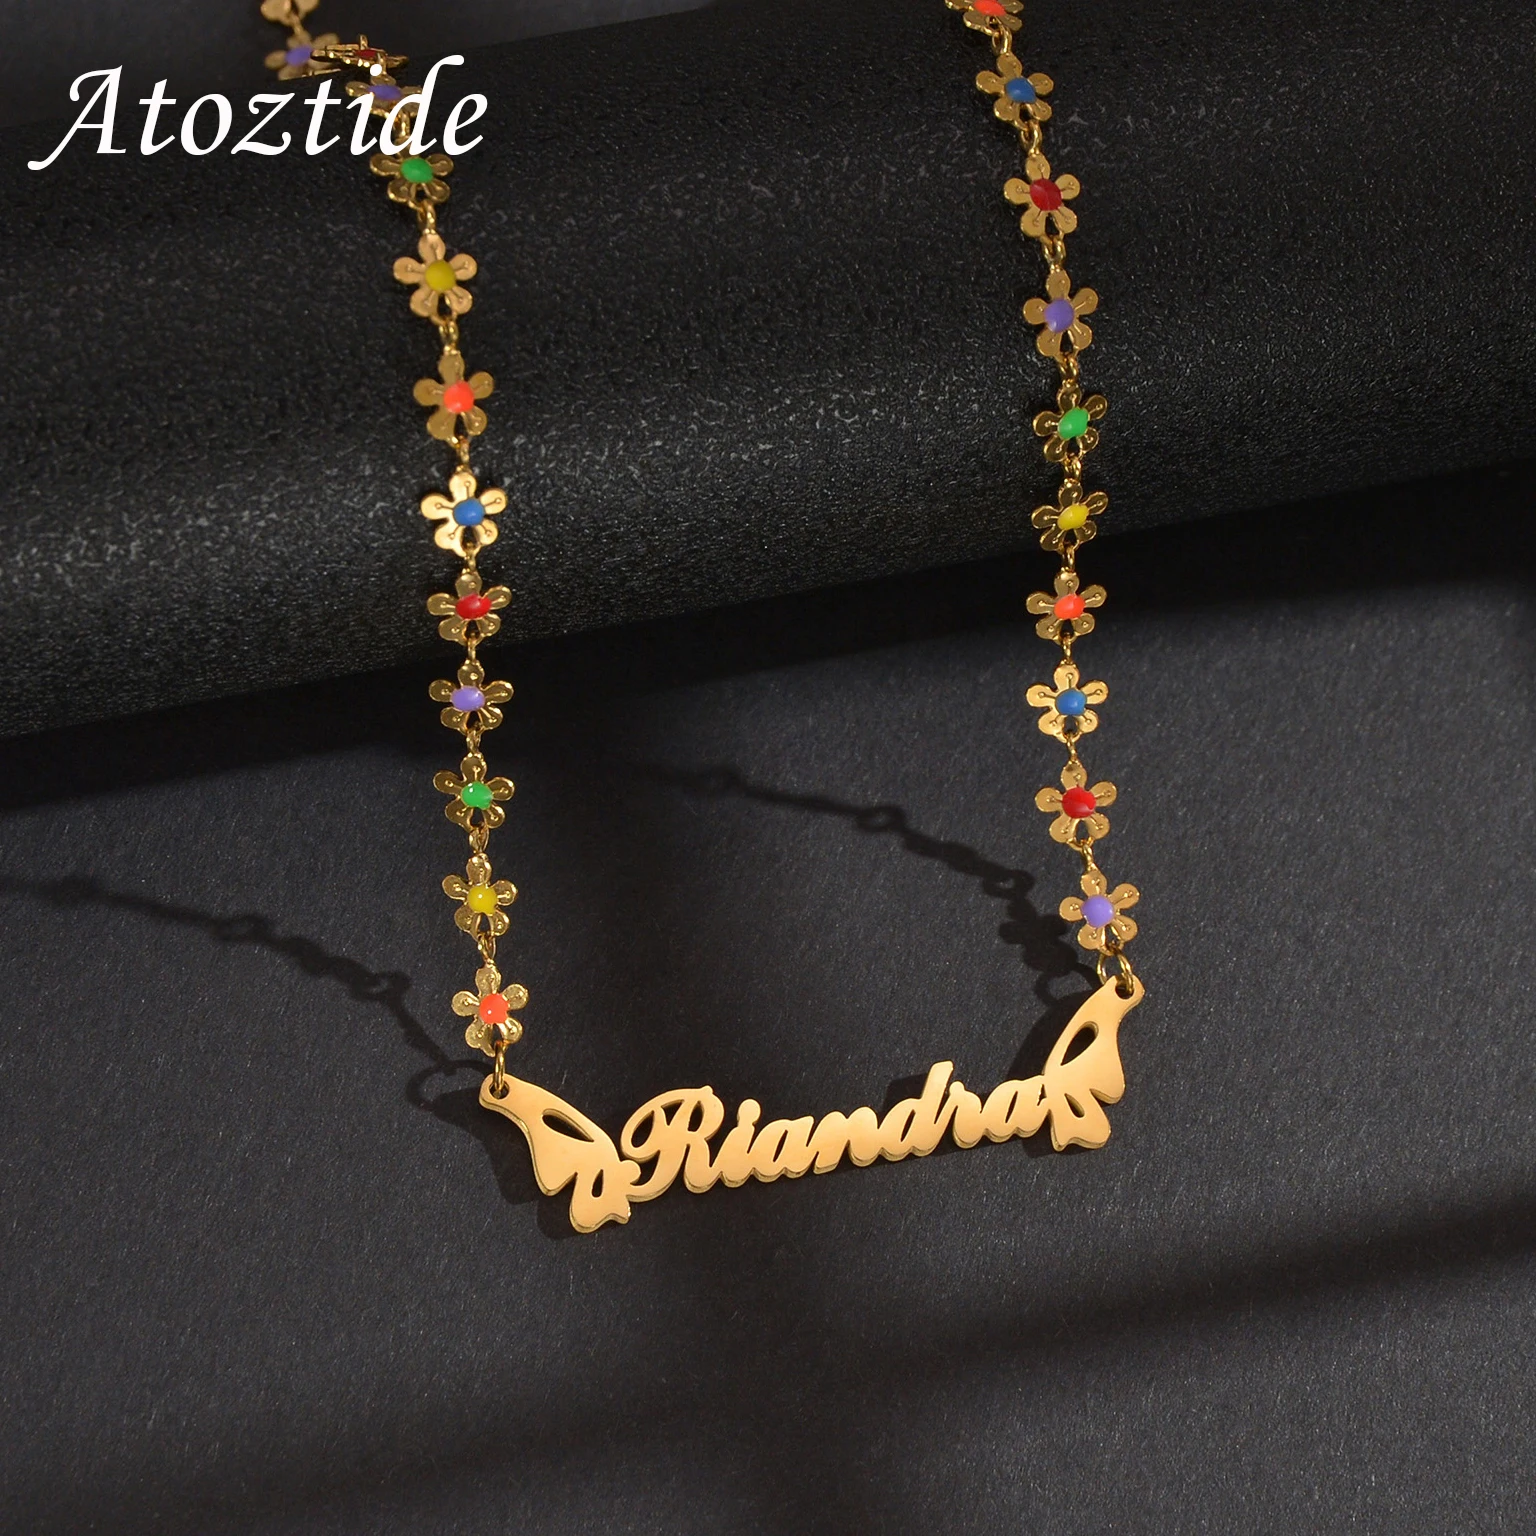 Atoztide Personalized Custom Name Necklace for Women Oil Flower Link Chain Stainless Steel Letter Fashion Pendant Jewelry Gift